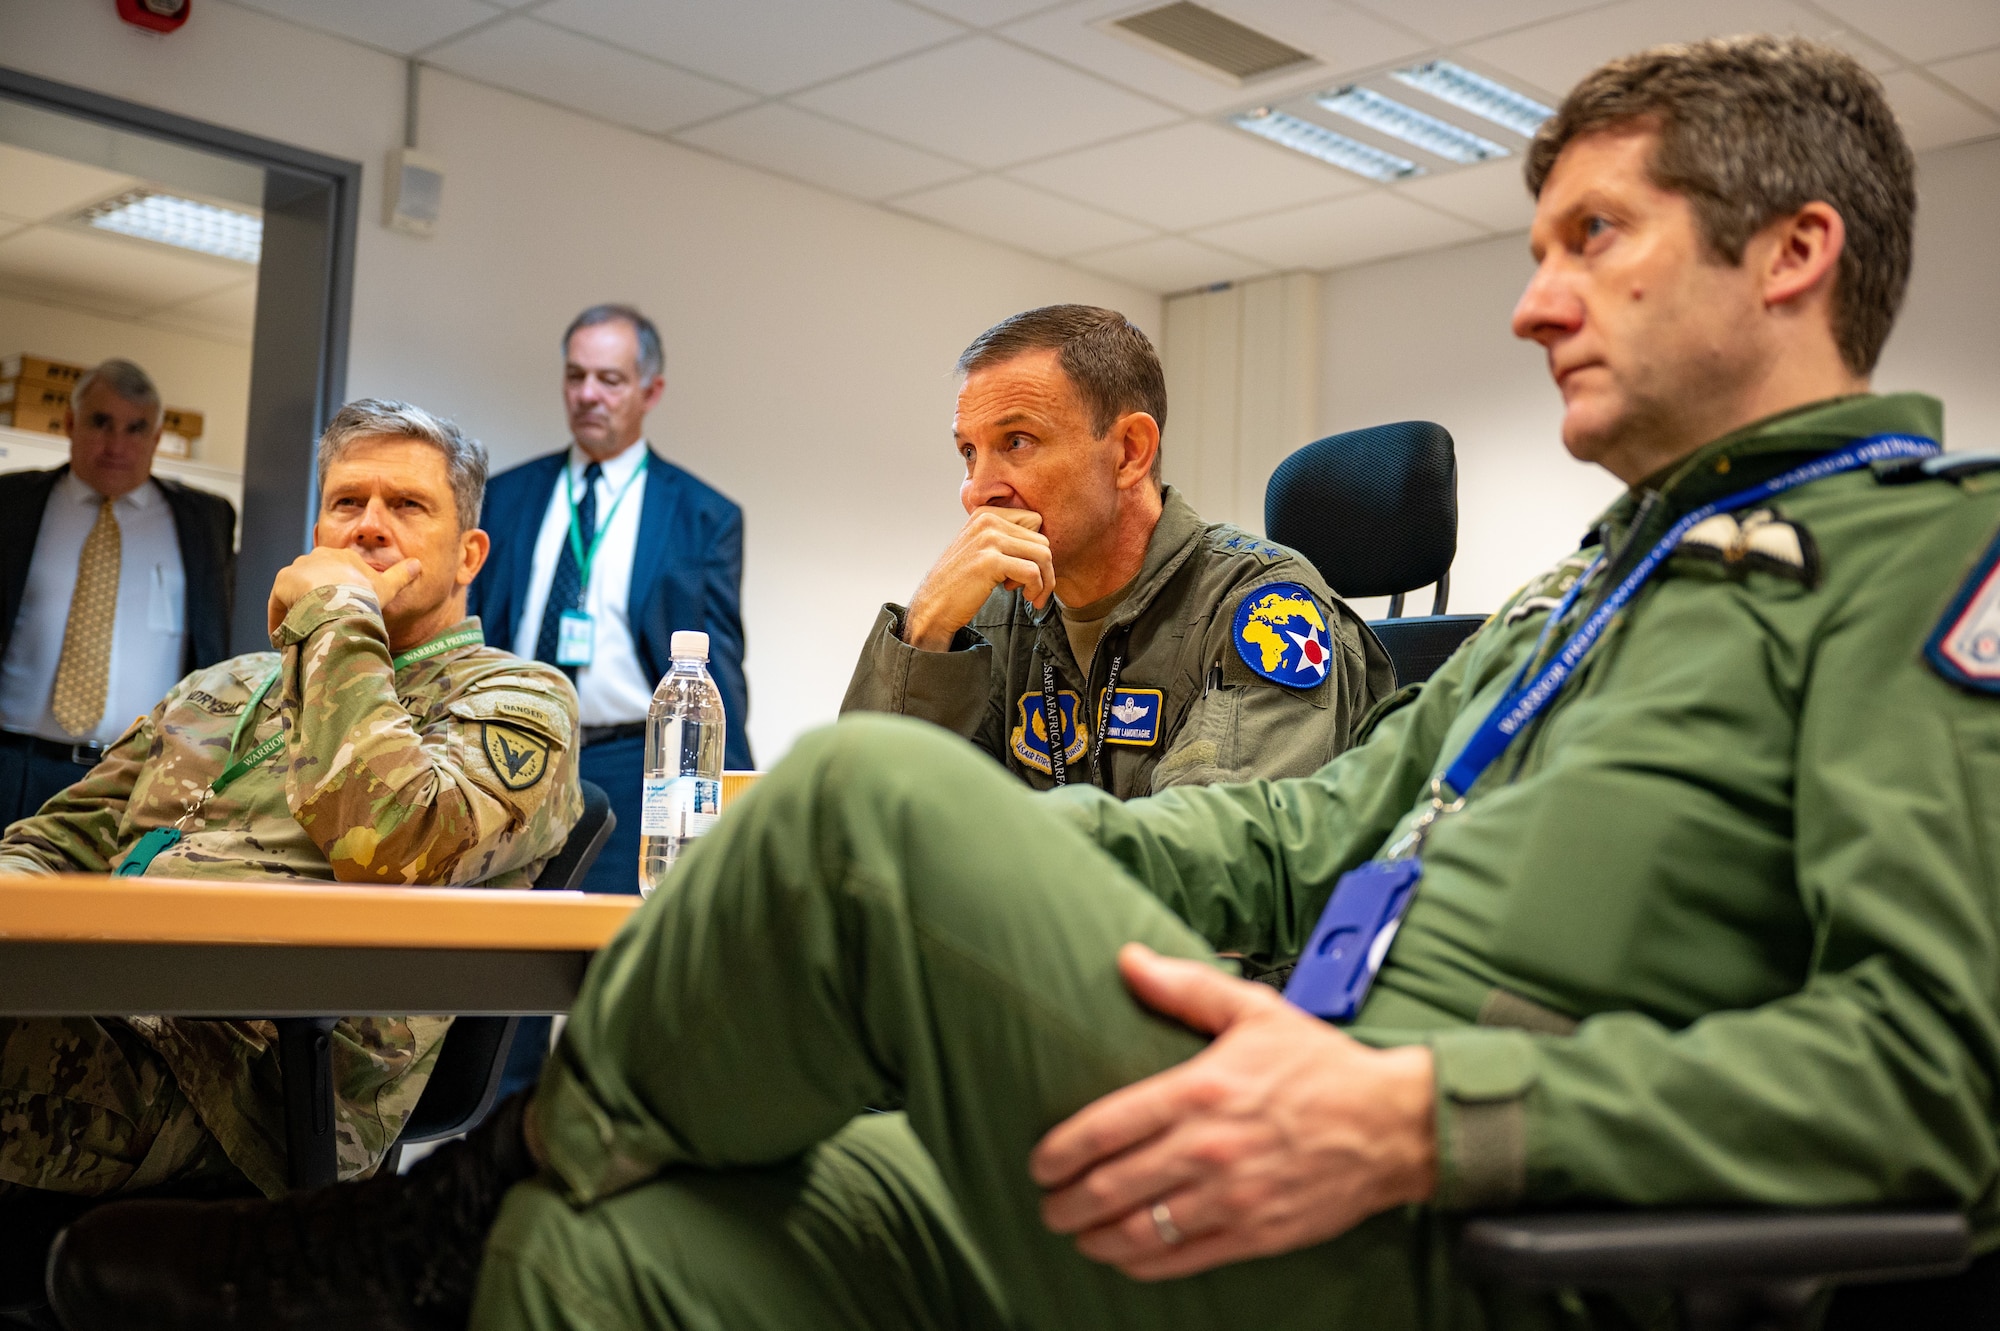 Lt. Gen. John Lamontagne, U.S. Air Forces in Europe-Air Forces Africa deputy commander (center), Air Marshal Johnny Stringer, Royal Air Force, Allied Air Command deputy commander (right), and U.S. Army Maj. Gen. Peter Andrysiak, U.S. European Command J-3 director (left), receive a situation brief during European Test Bed Senior Leader Seminar at Einsiedlerhof Air Station, Germany, Nov. 4, 2022. ETB is an experimentation venue where the U.S. and NATO can explore, evaluate and align concepts and strategies to defend Europe from air and missile attacks. (U.S. Air Force photo by Staff Sgt. Steven M. Adkins)